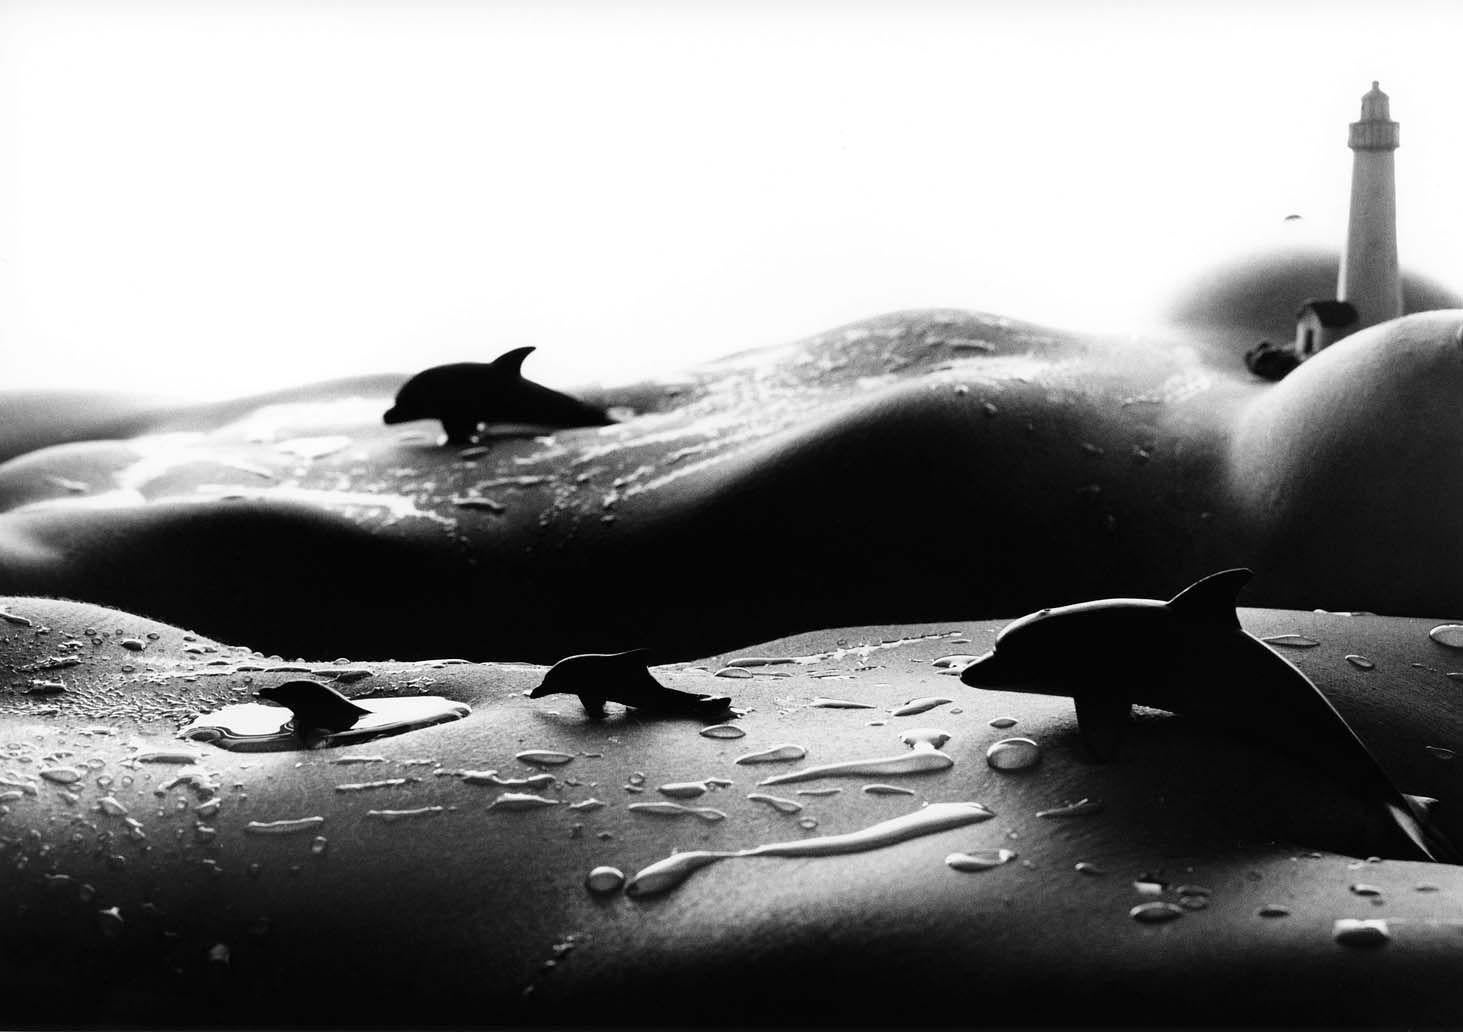 Dolphins - Photograph by Allan Teger